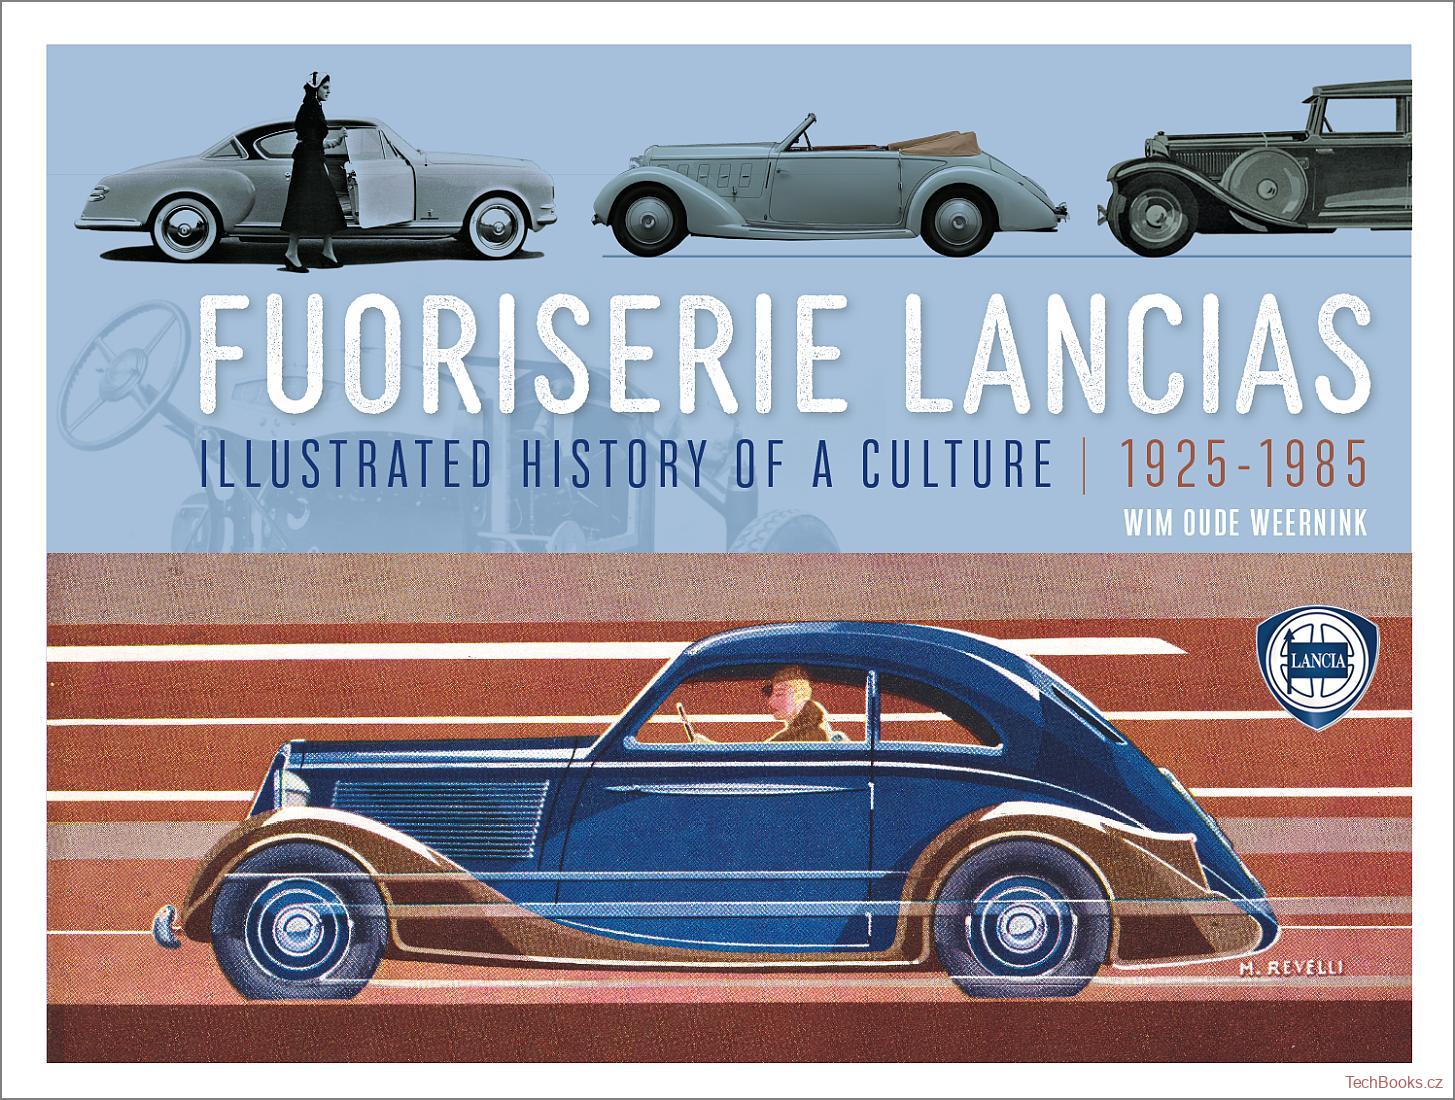 Fuoriserie Lancias - Illustrated History of a Culture 1925-1985